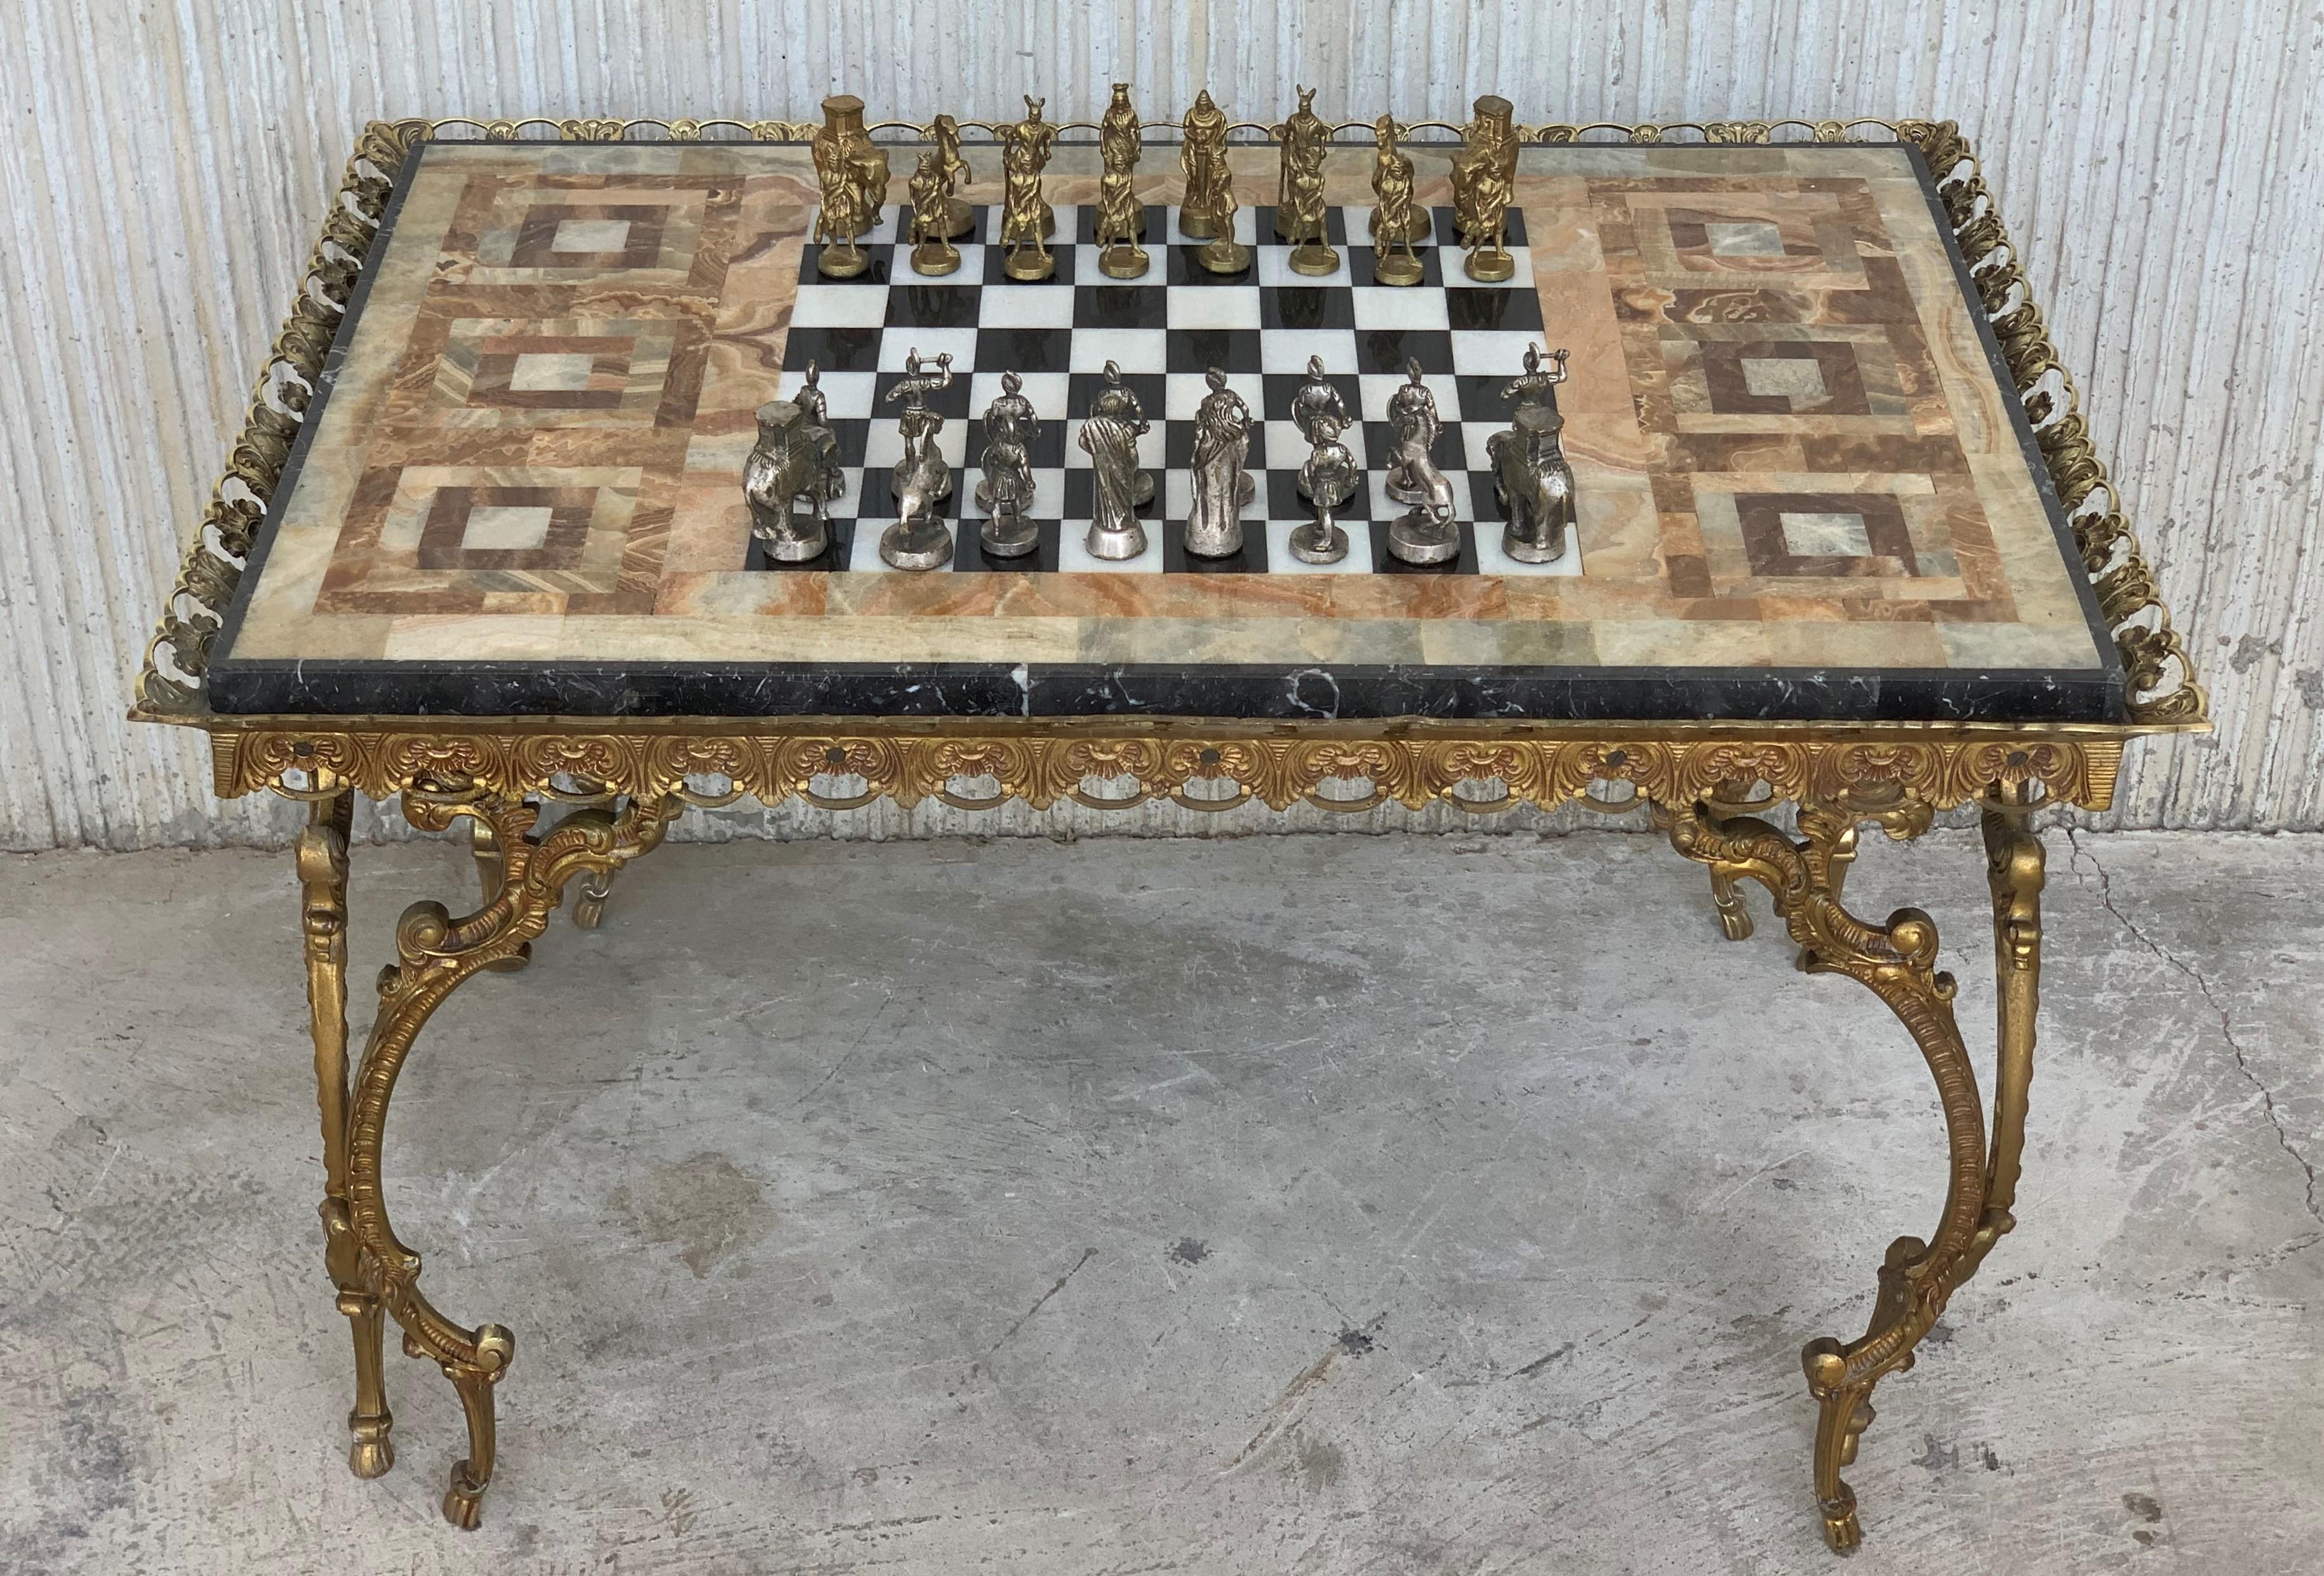 19th century bronze game of chess with marble and bronze table
Top marble in perfect shape with beautiful bronze edges and legs.